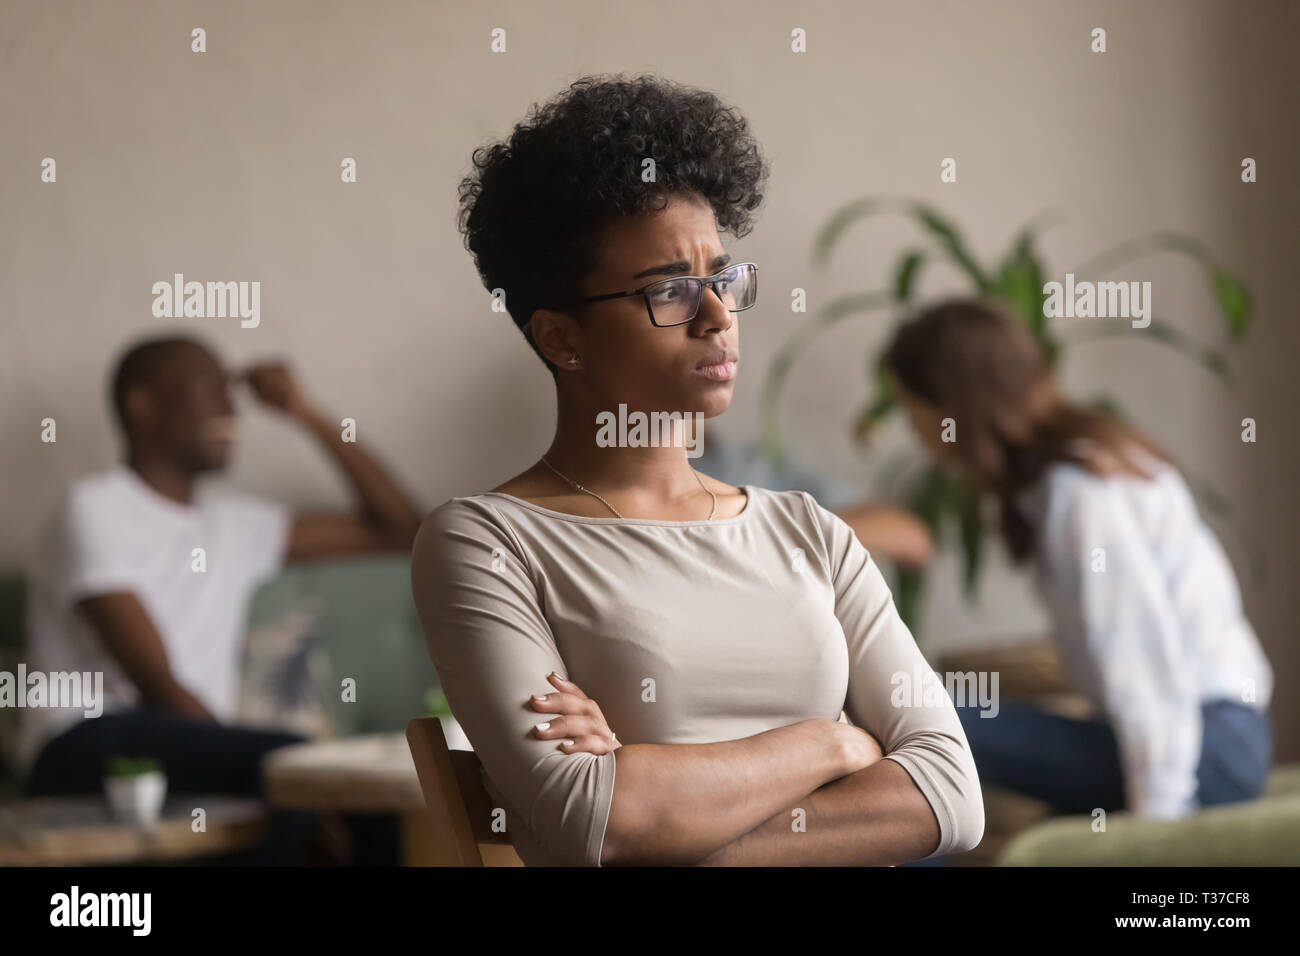 Upset african american student outcast bully victim suffer from discrimination Stock Photo